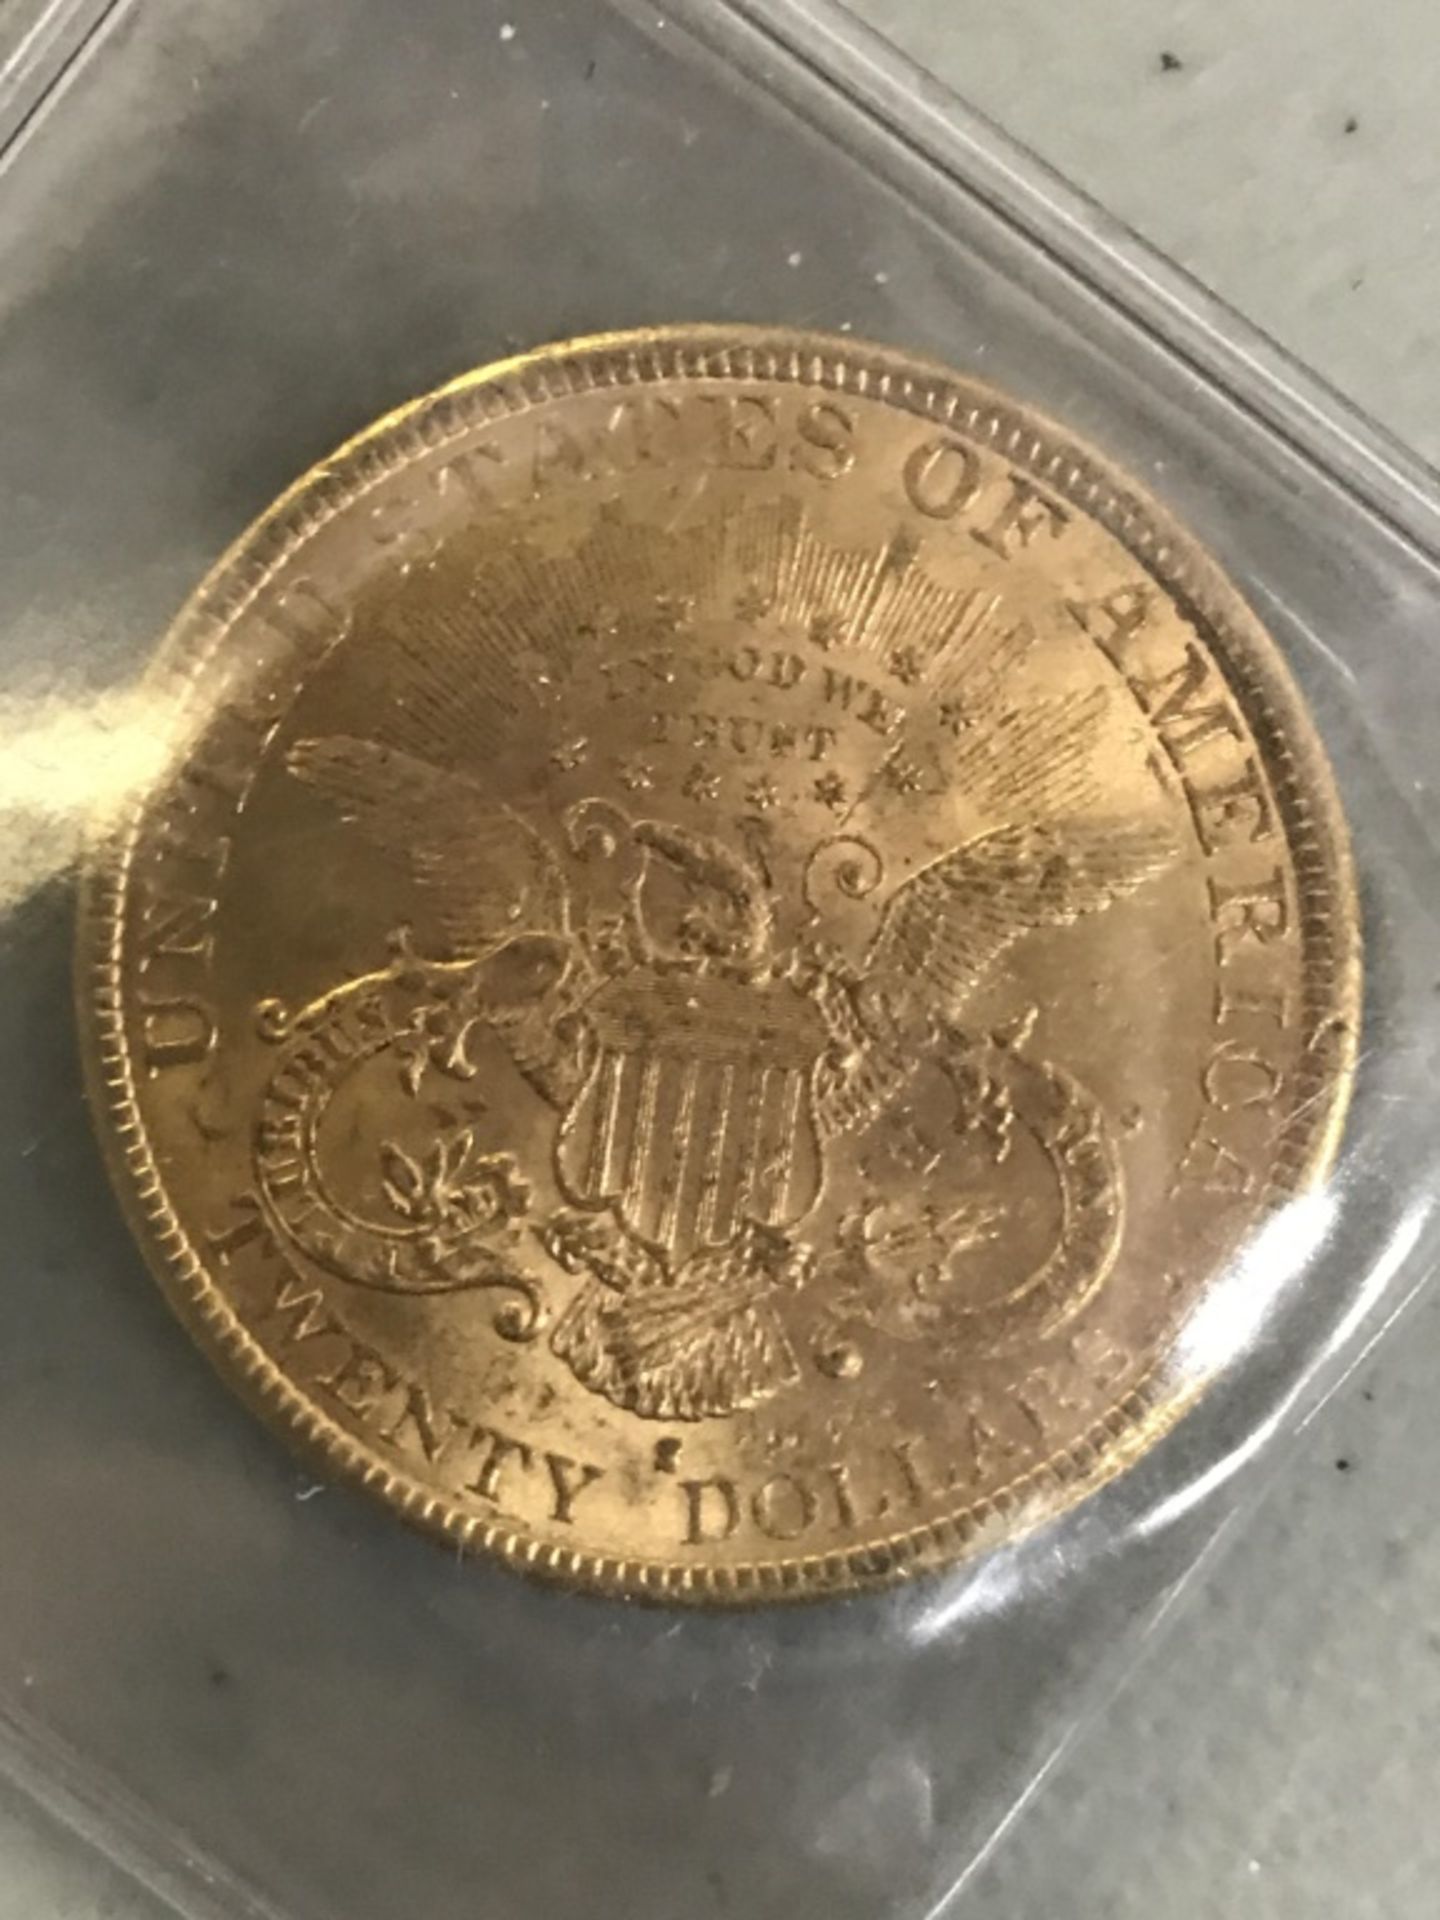 $20 Us Gold 1892 Coin - Image 9 of 9